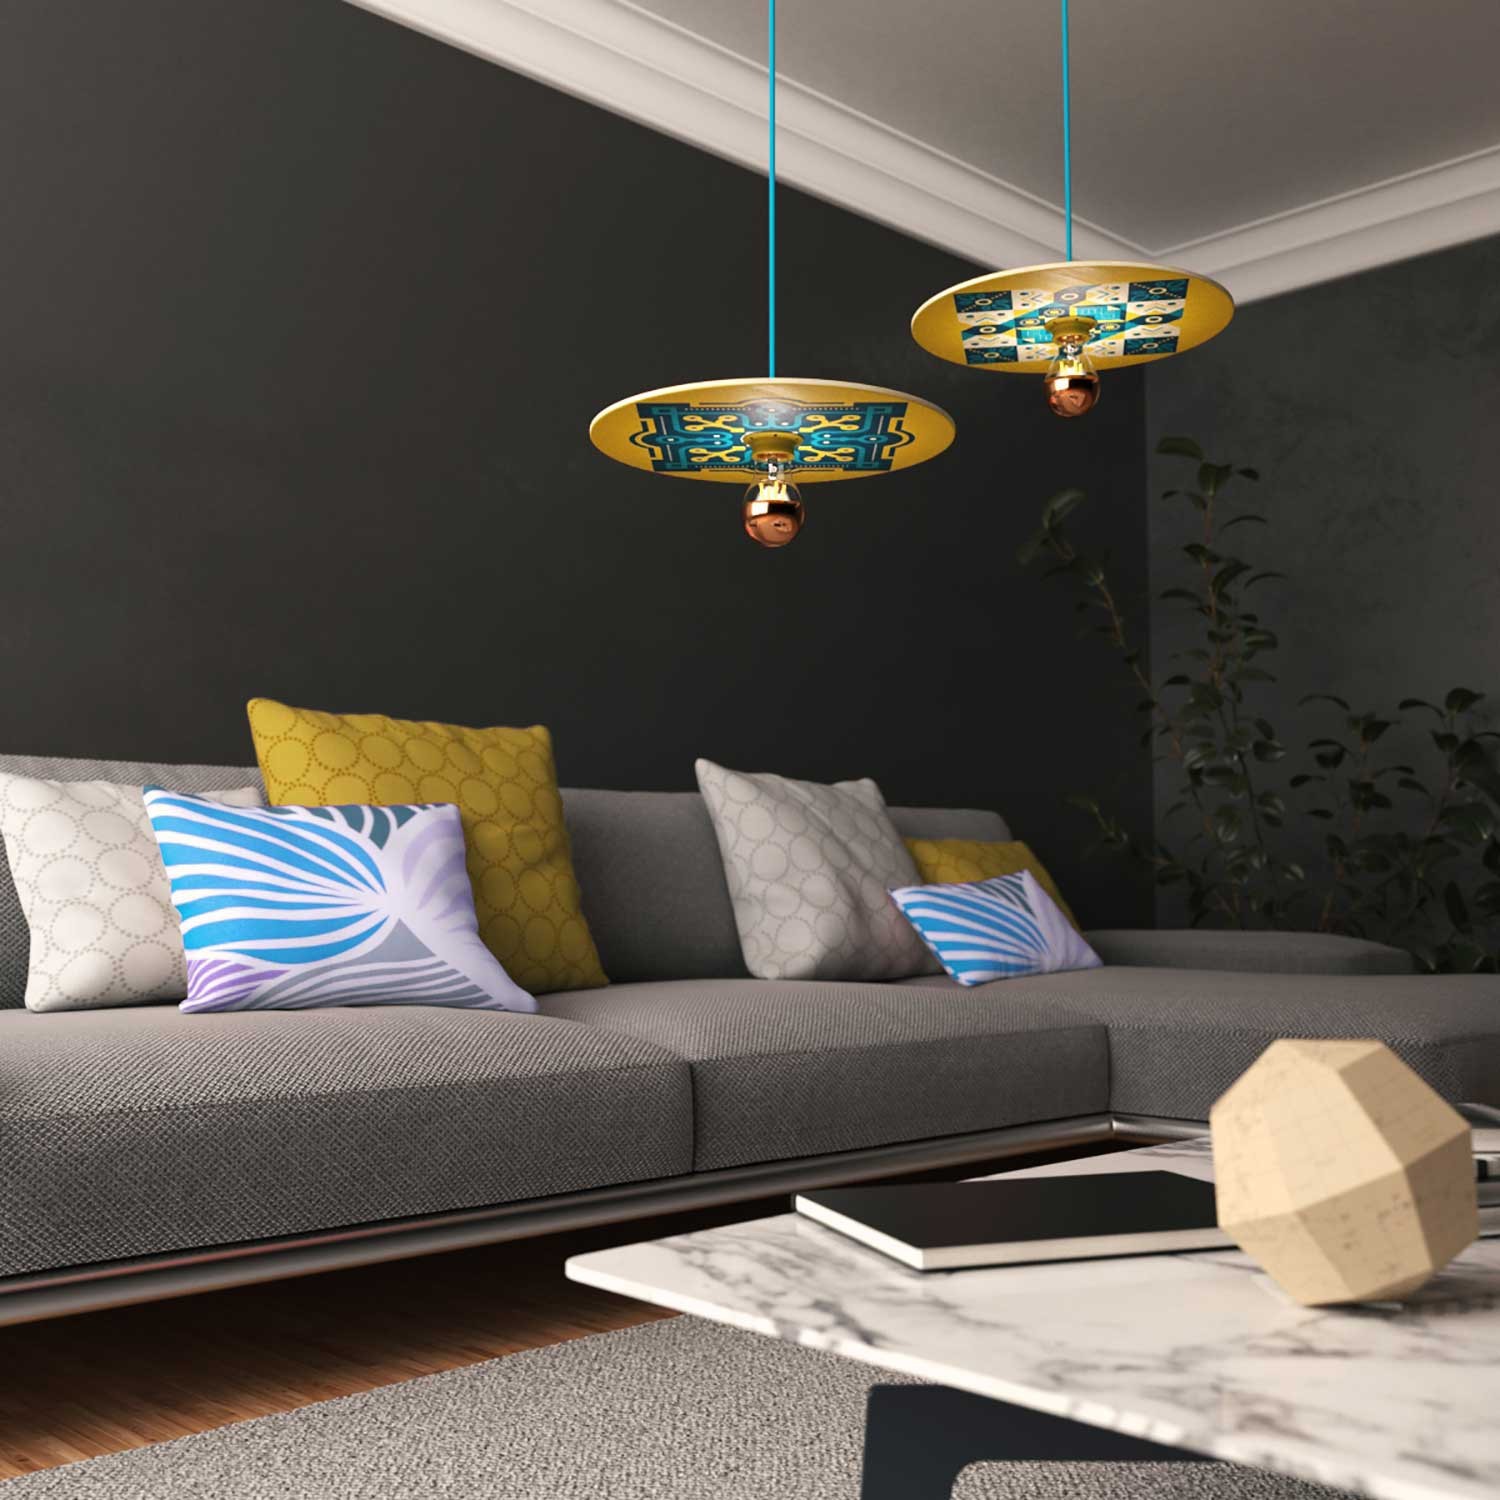 Pendant lamp with textile cable, UFO double-sided wooden lampshade and metal details - Made in Italy